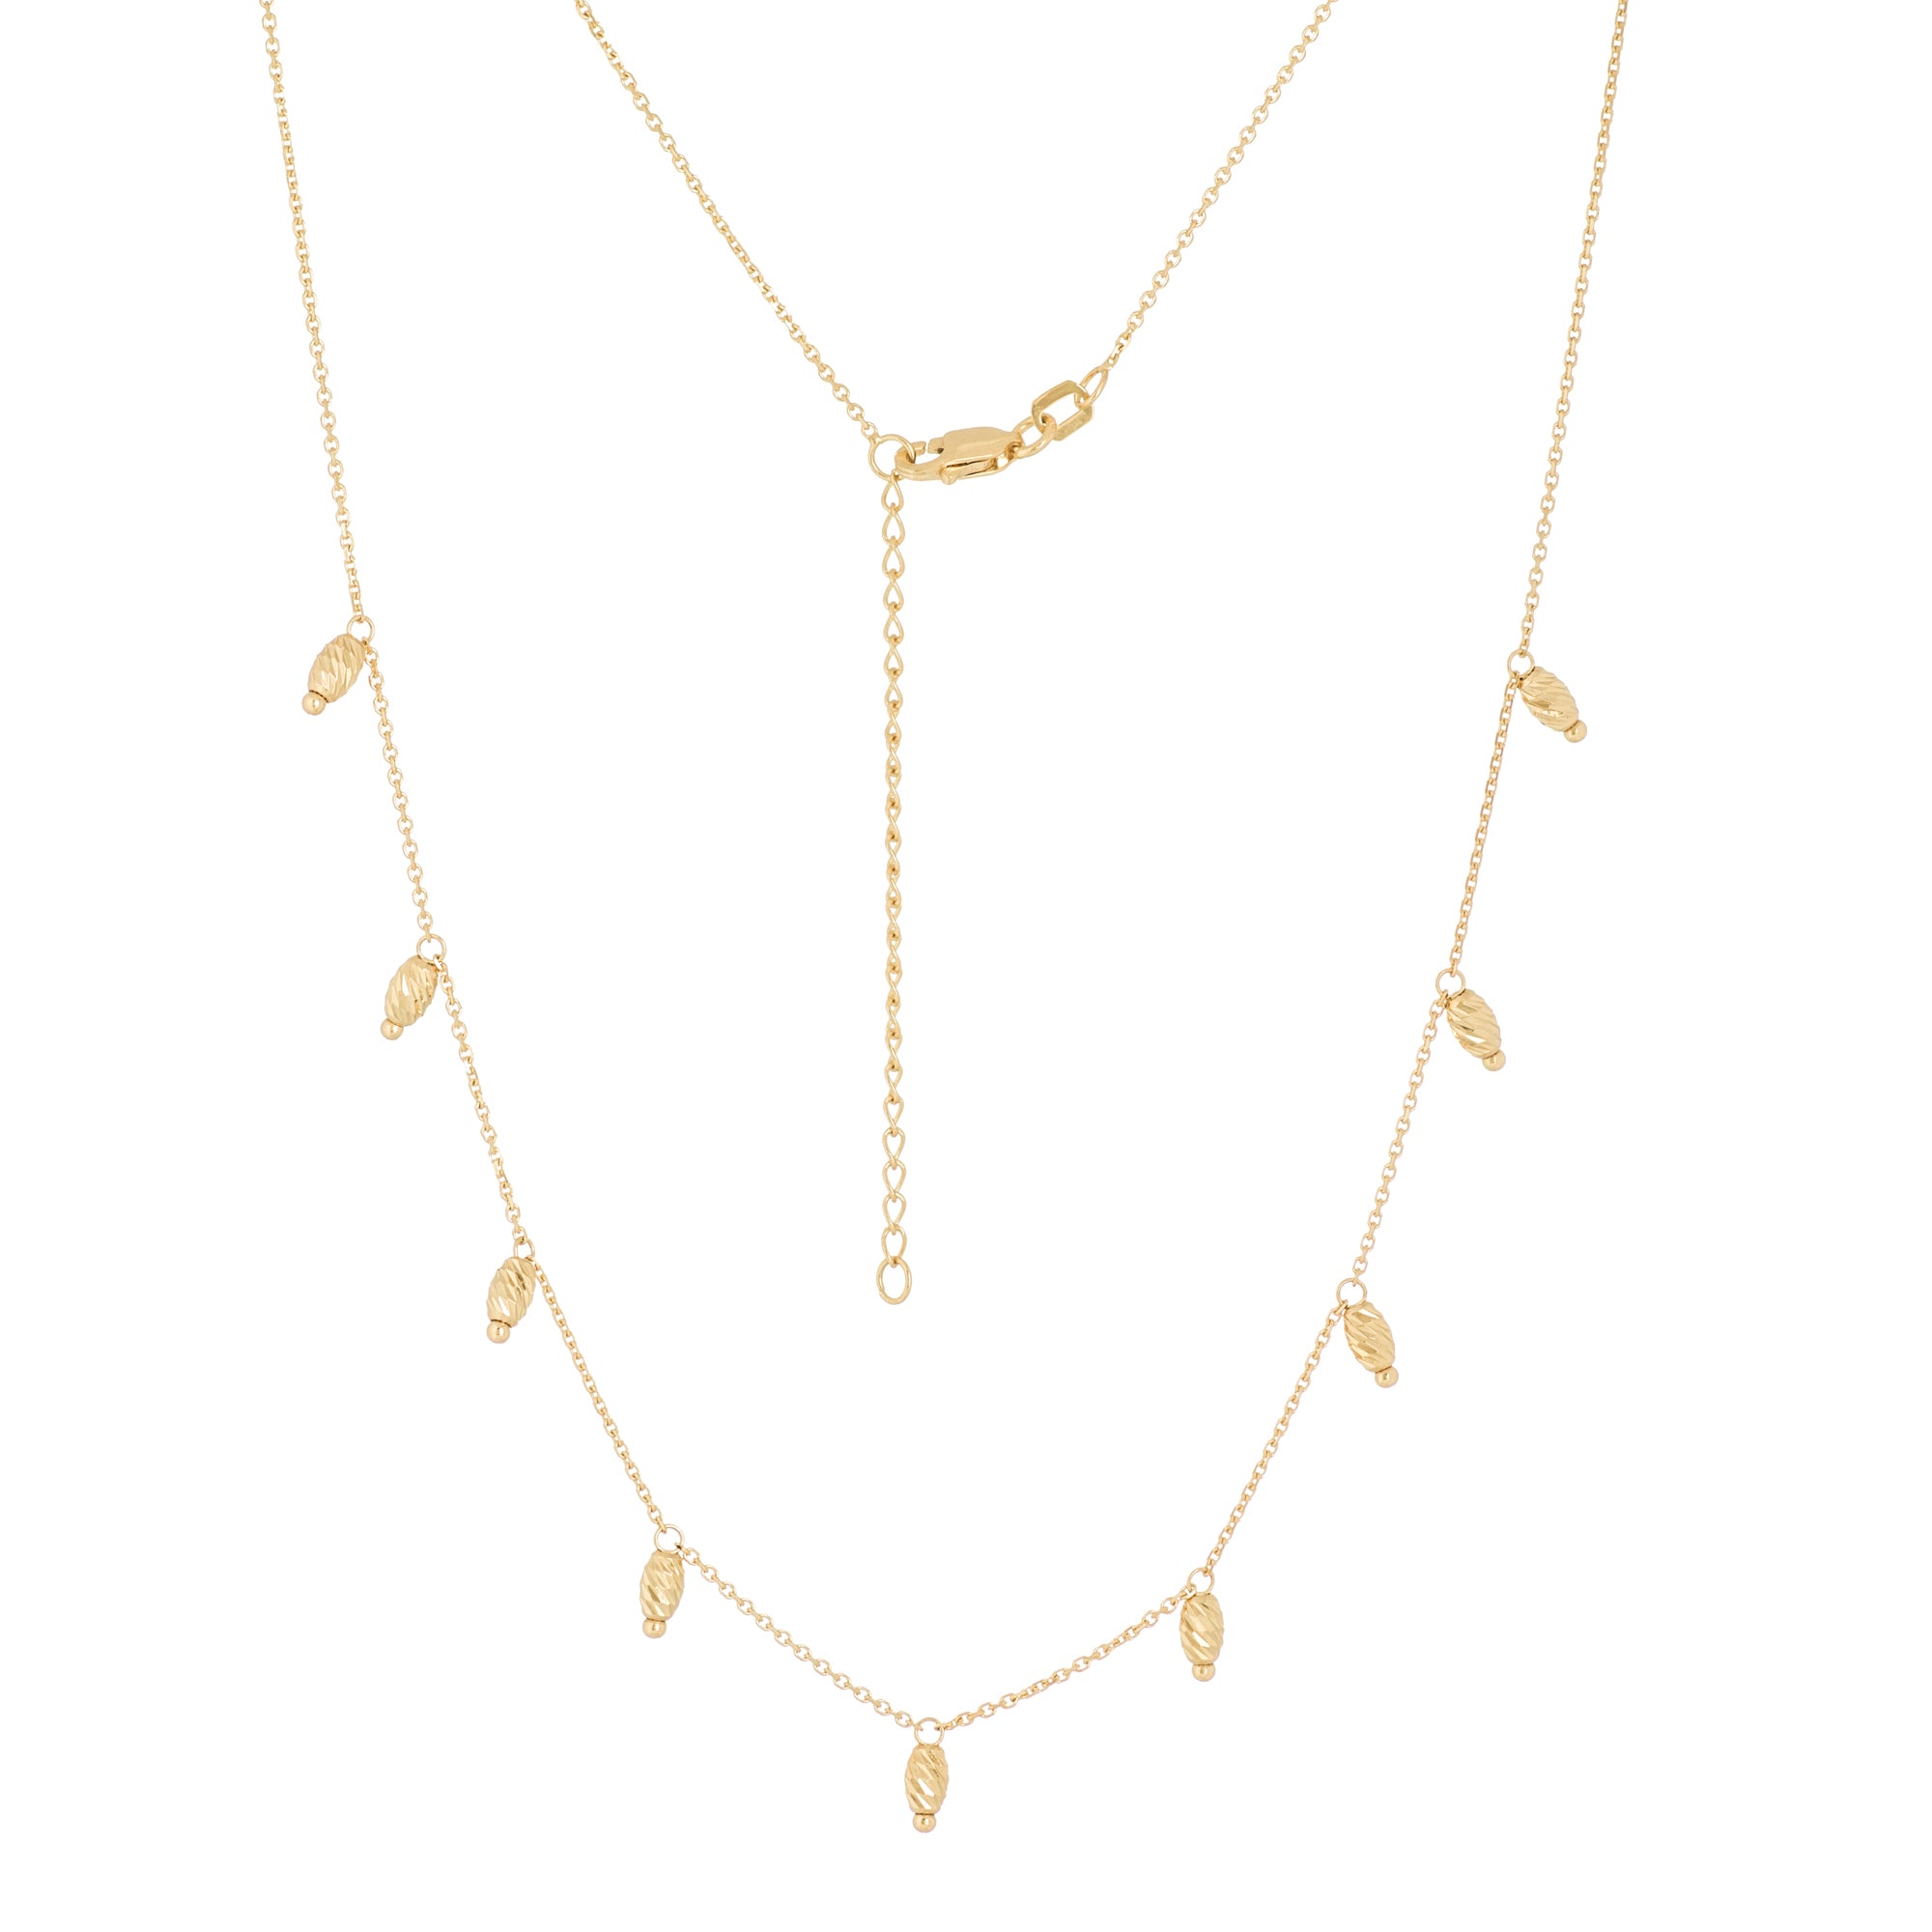 14K Yellow Gold Bead Stations 9pcs Adjustable Necklace with Cable Chain